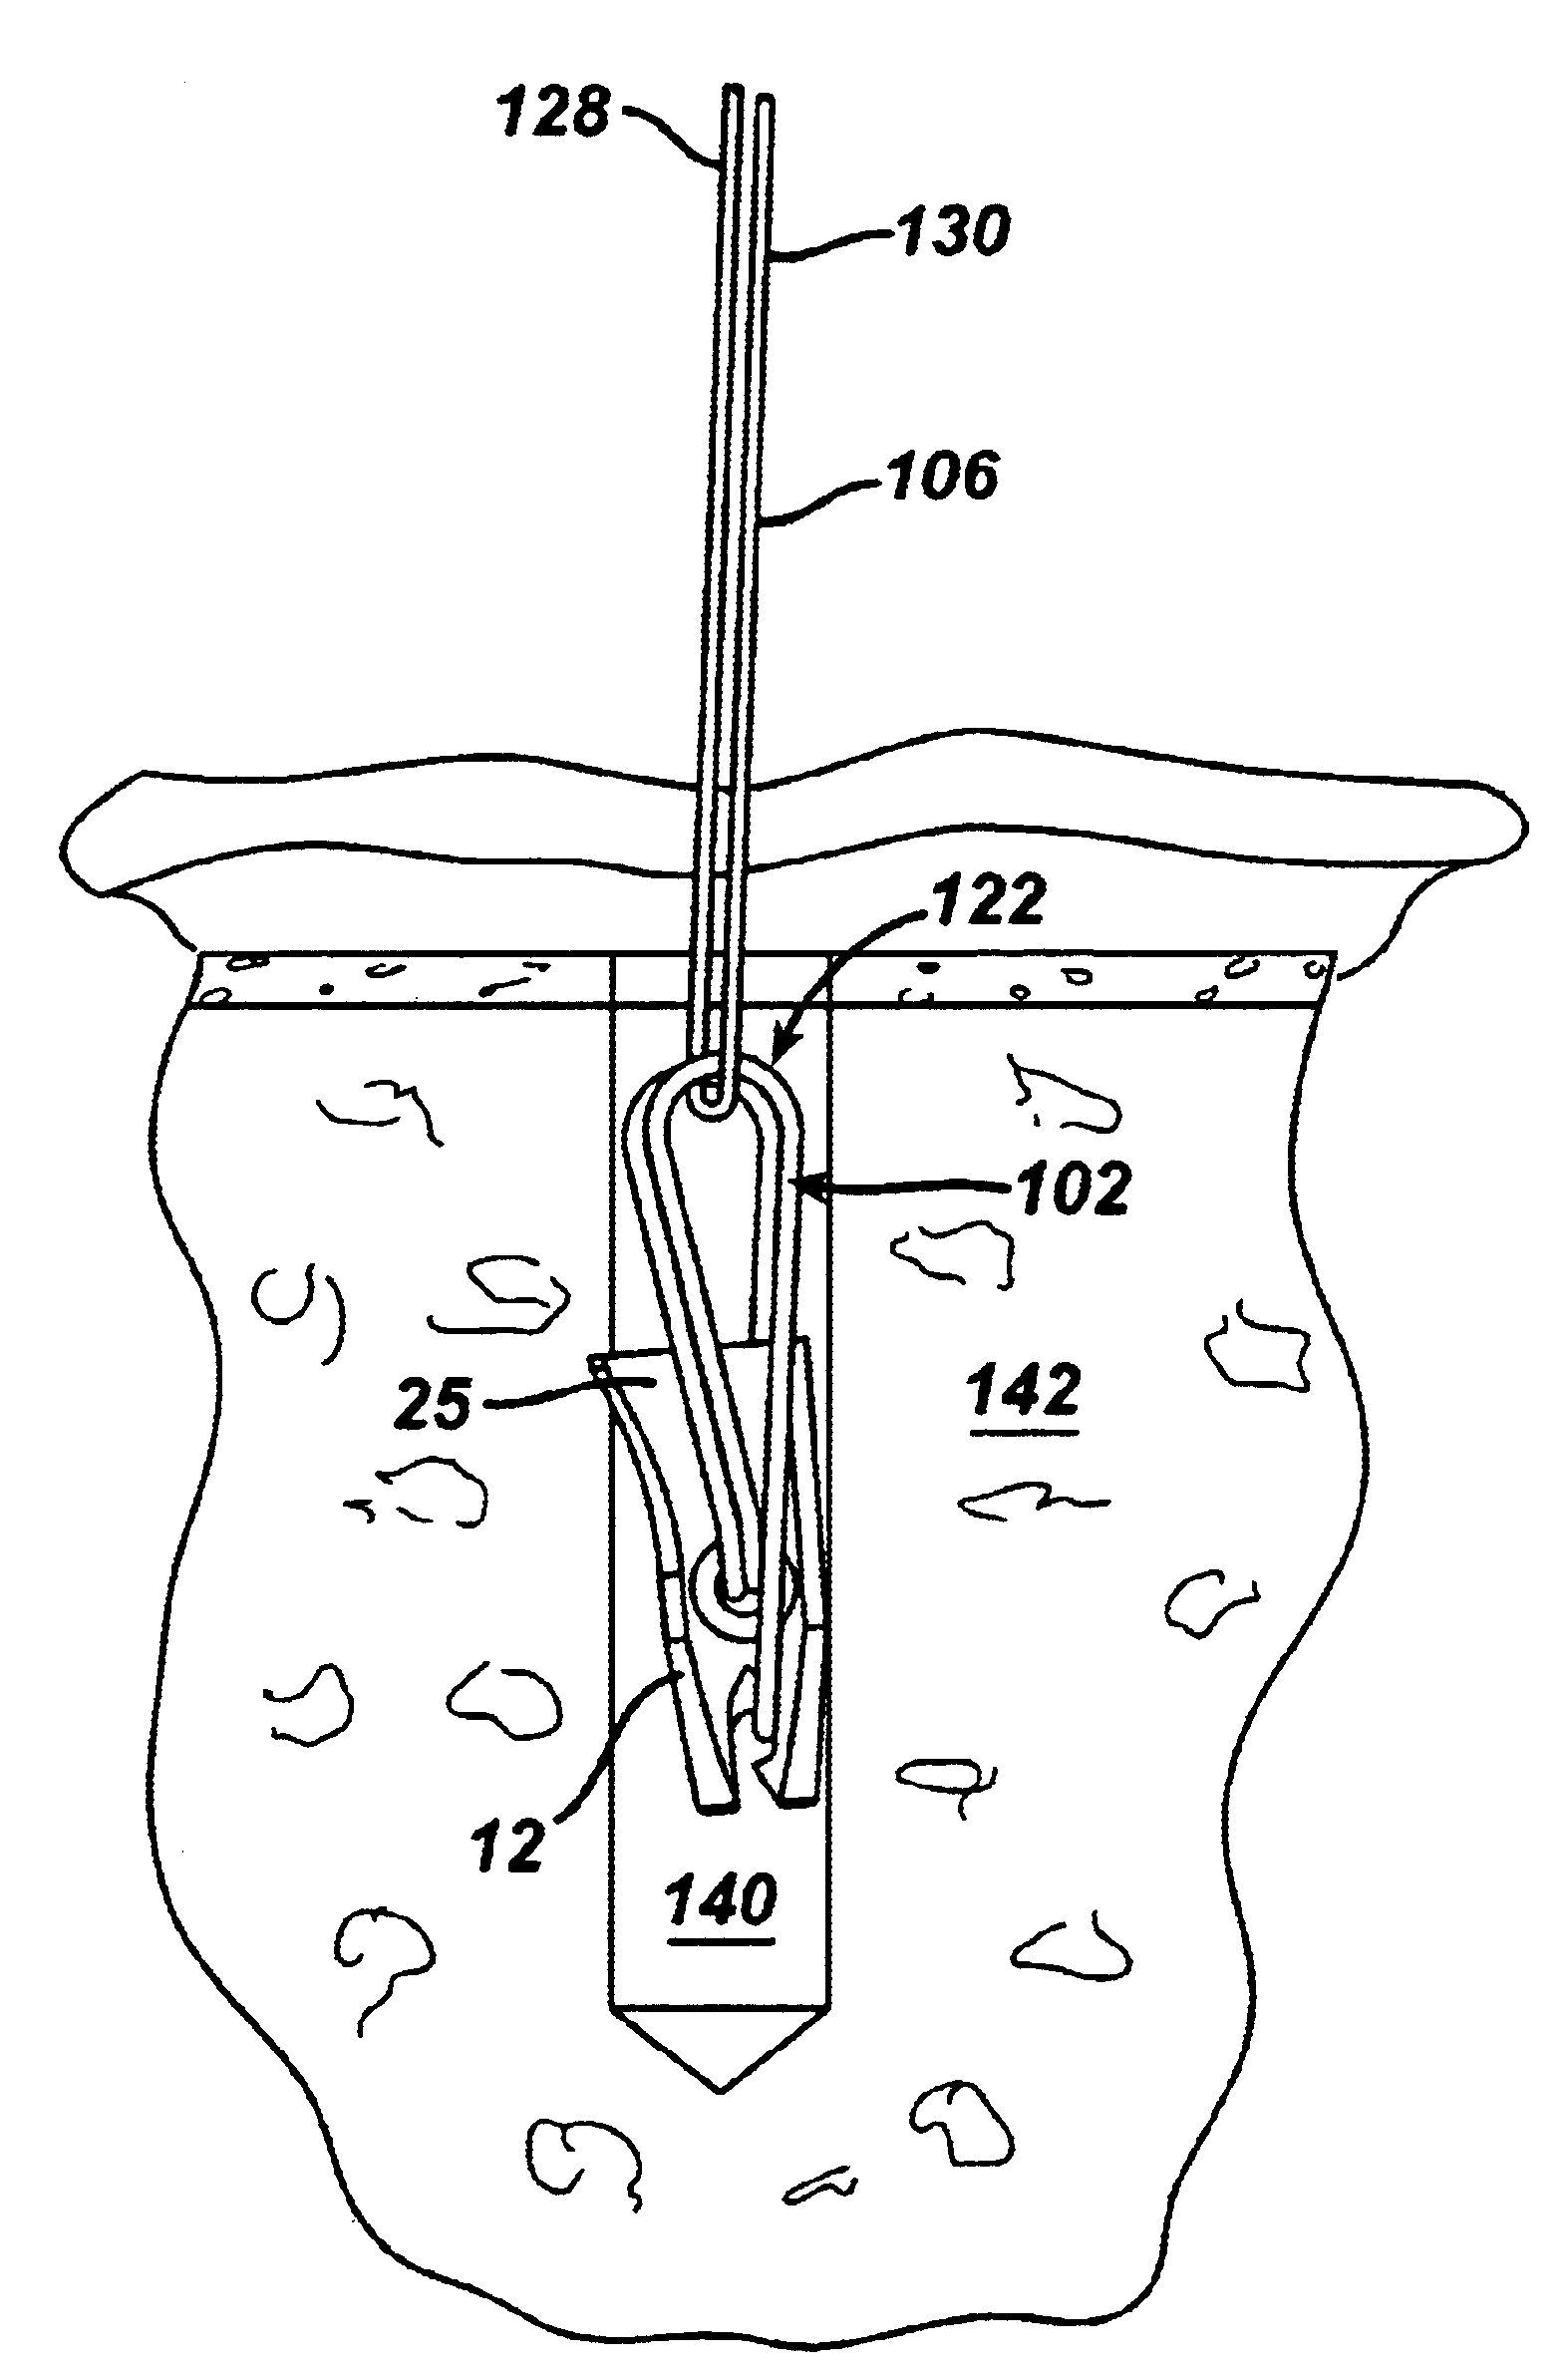 Suture anchor system and method of use